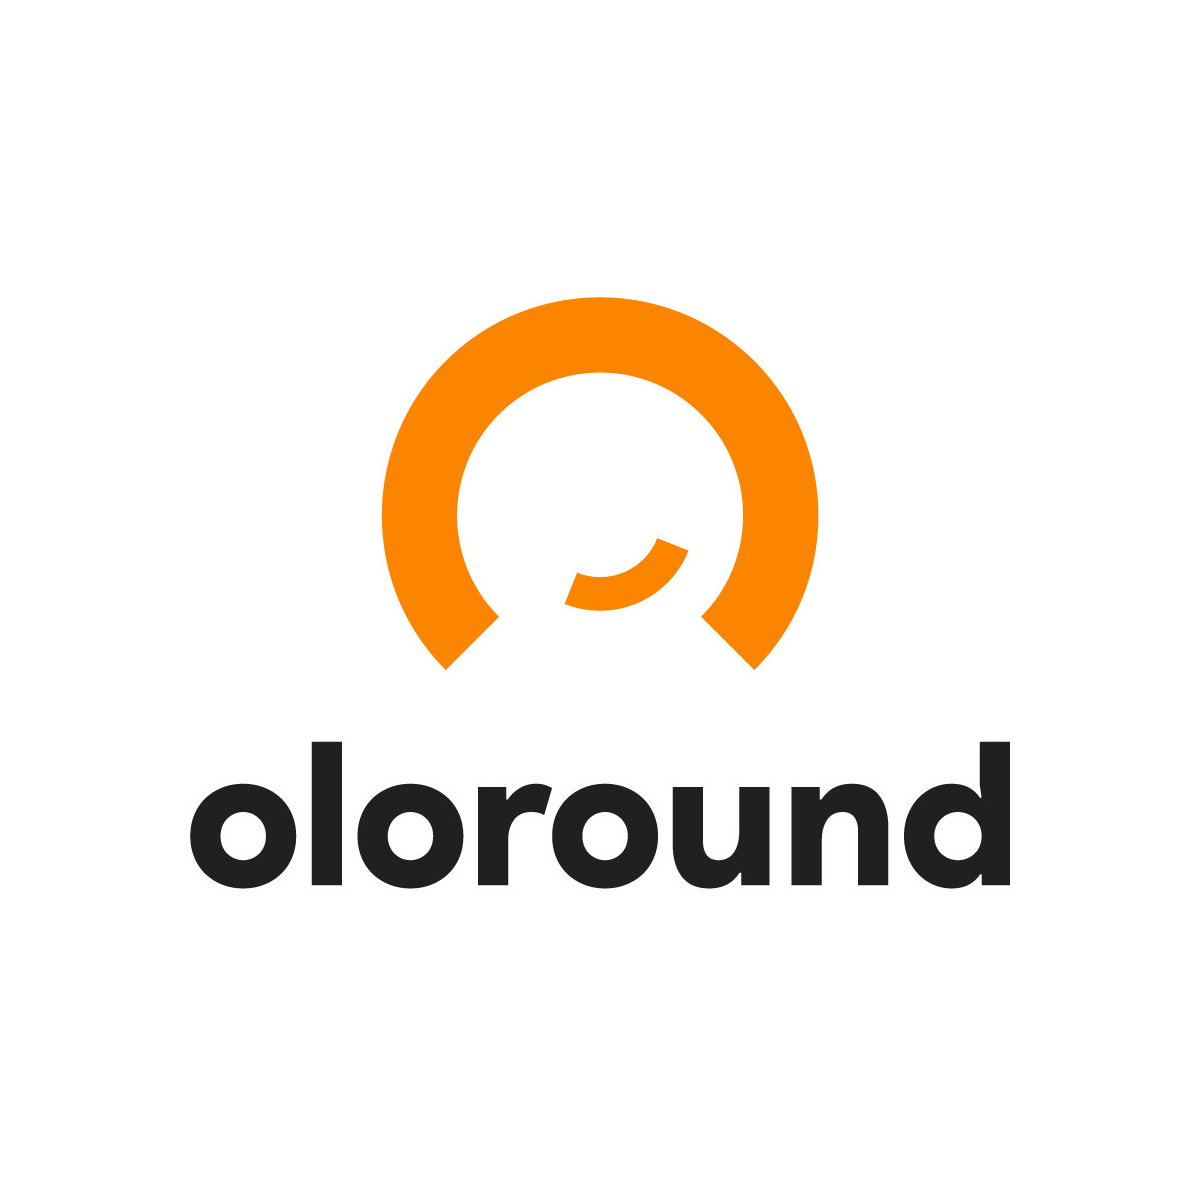 oloround micromile fulfillment for Shopify